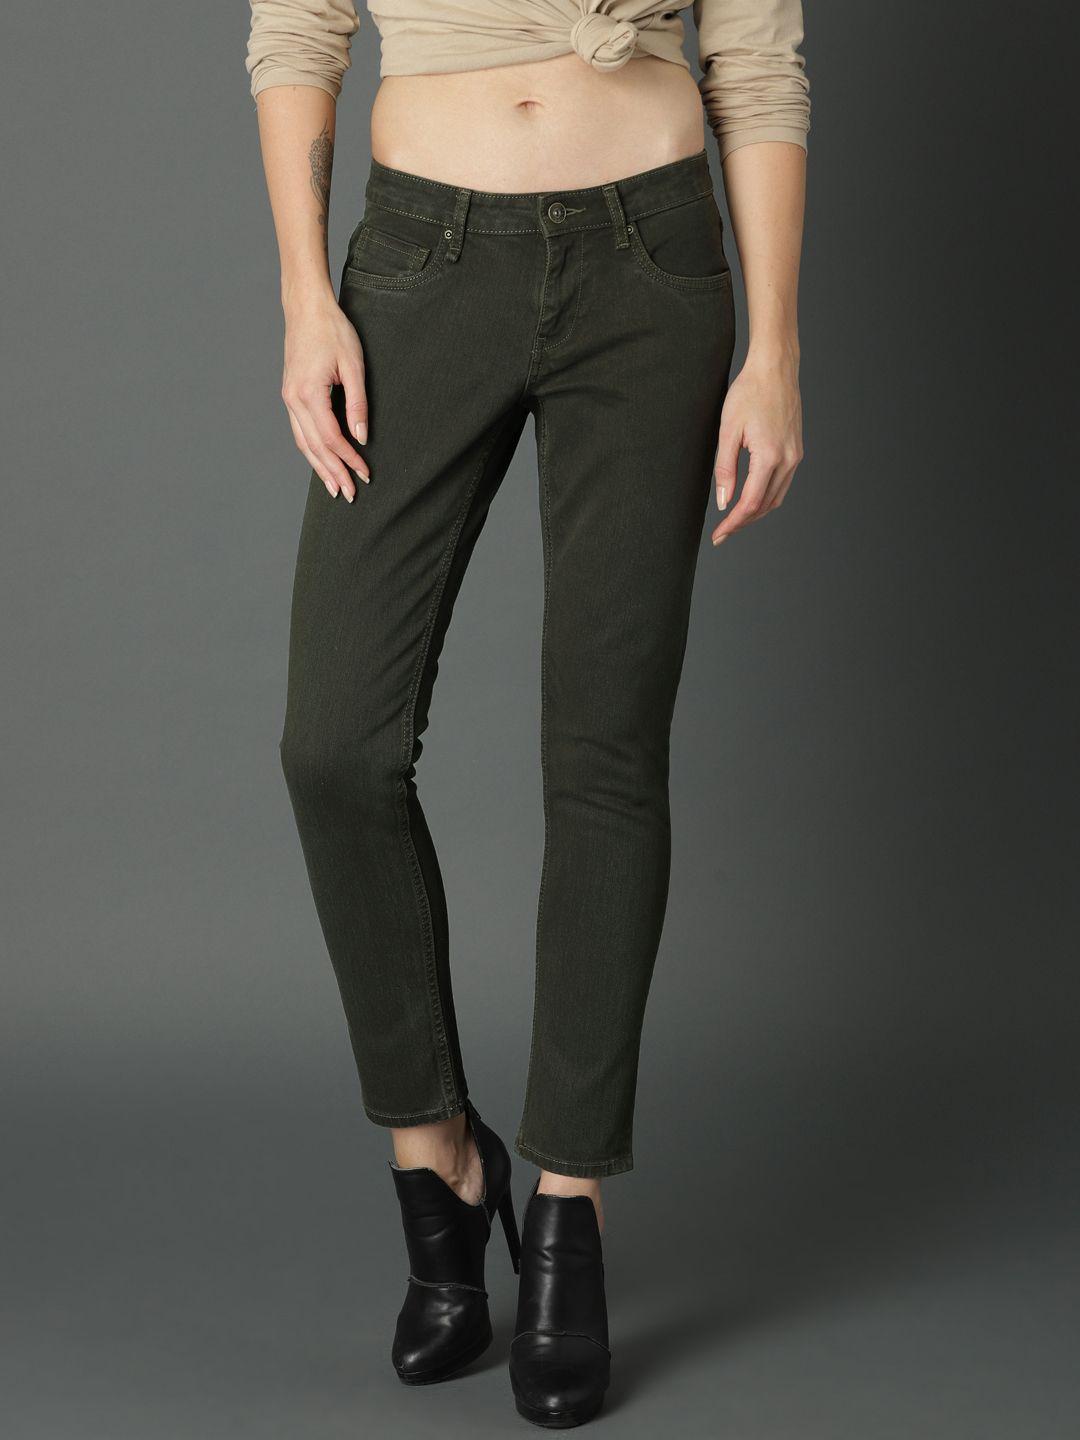 roadster women olive green slim fit mid-rise clean look stretchable jeans